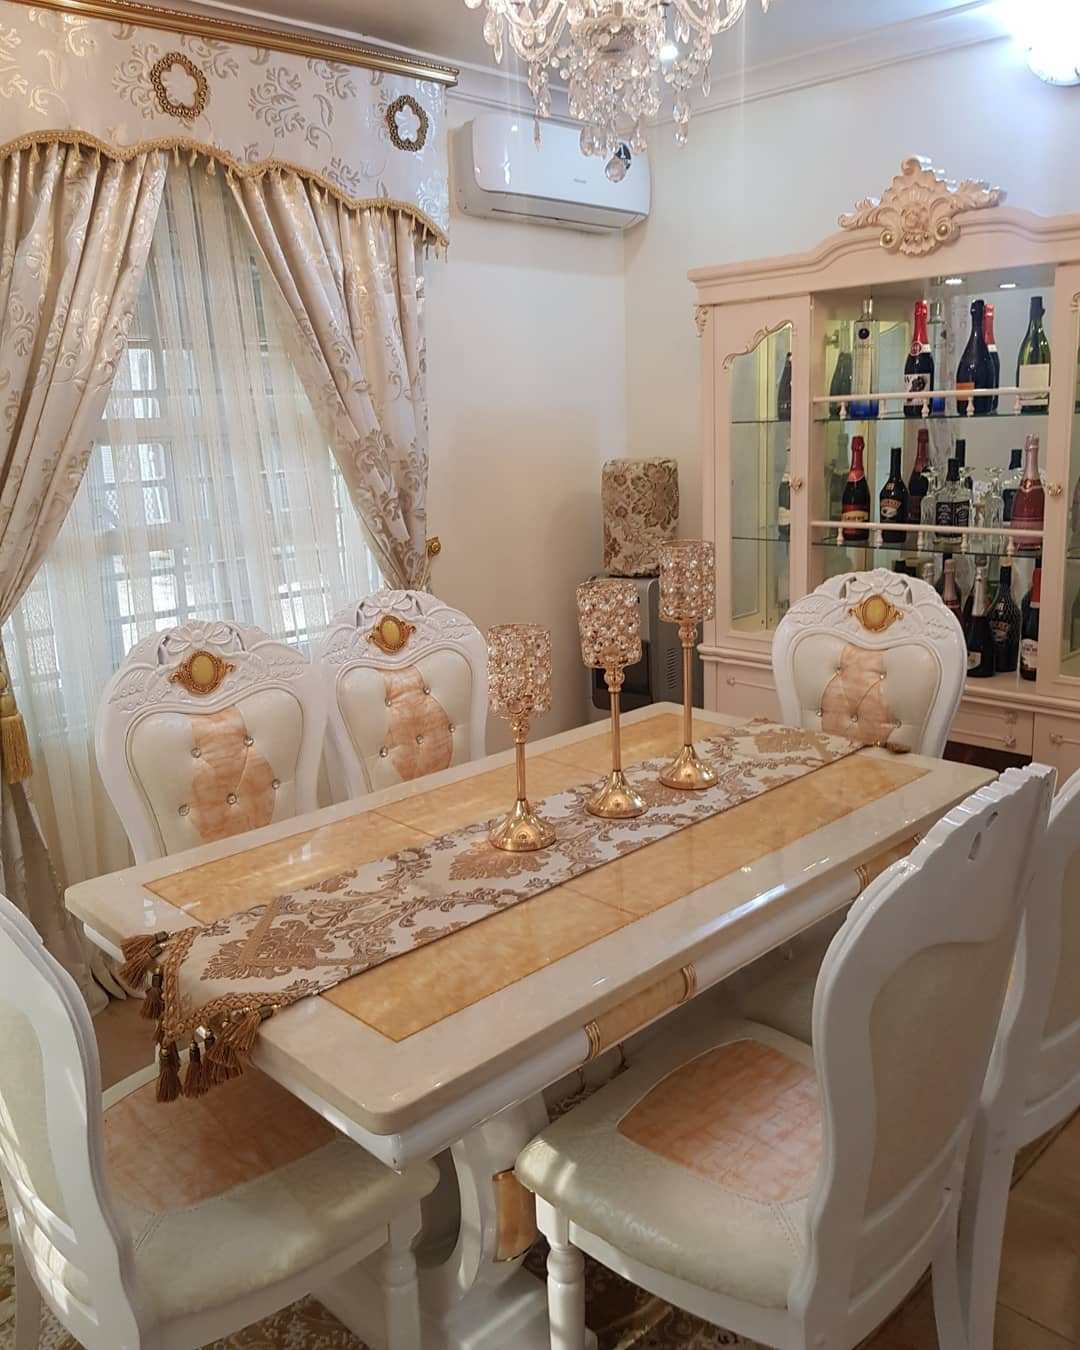 Mercy Aigbe shows off her impressive dining room in her new mansion (Photos)